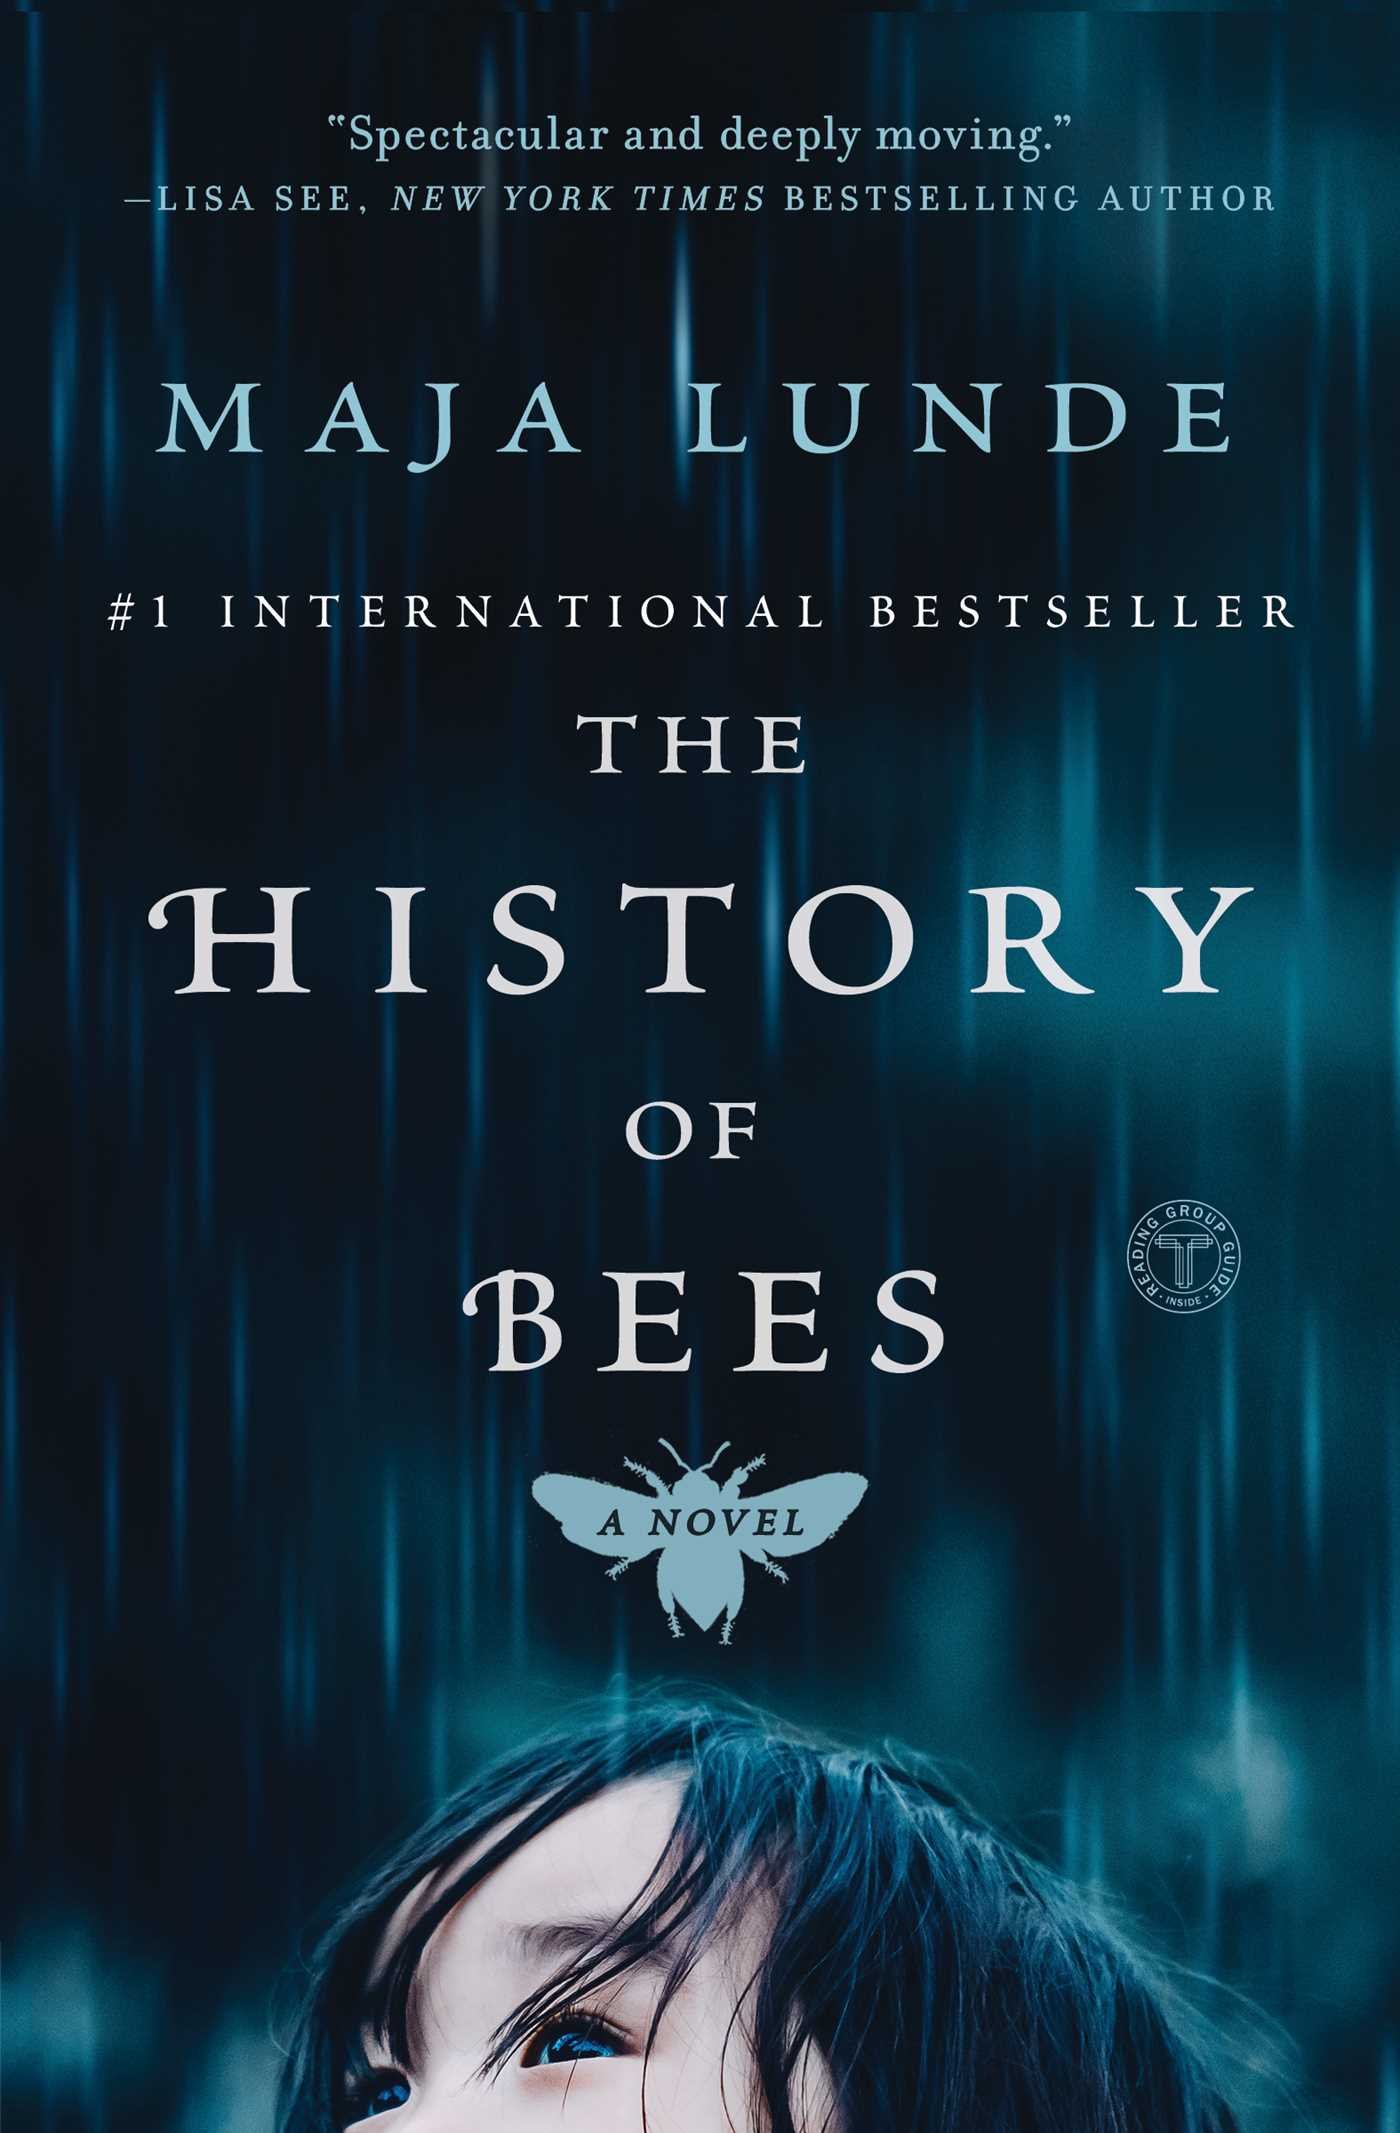 The History of Bees by Naja Lunde book cover